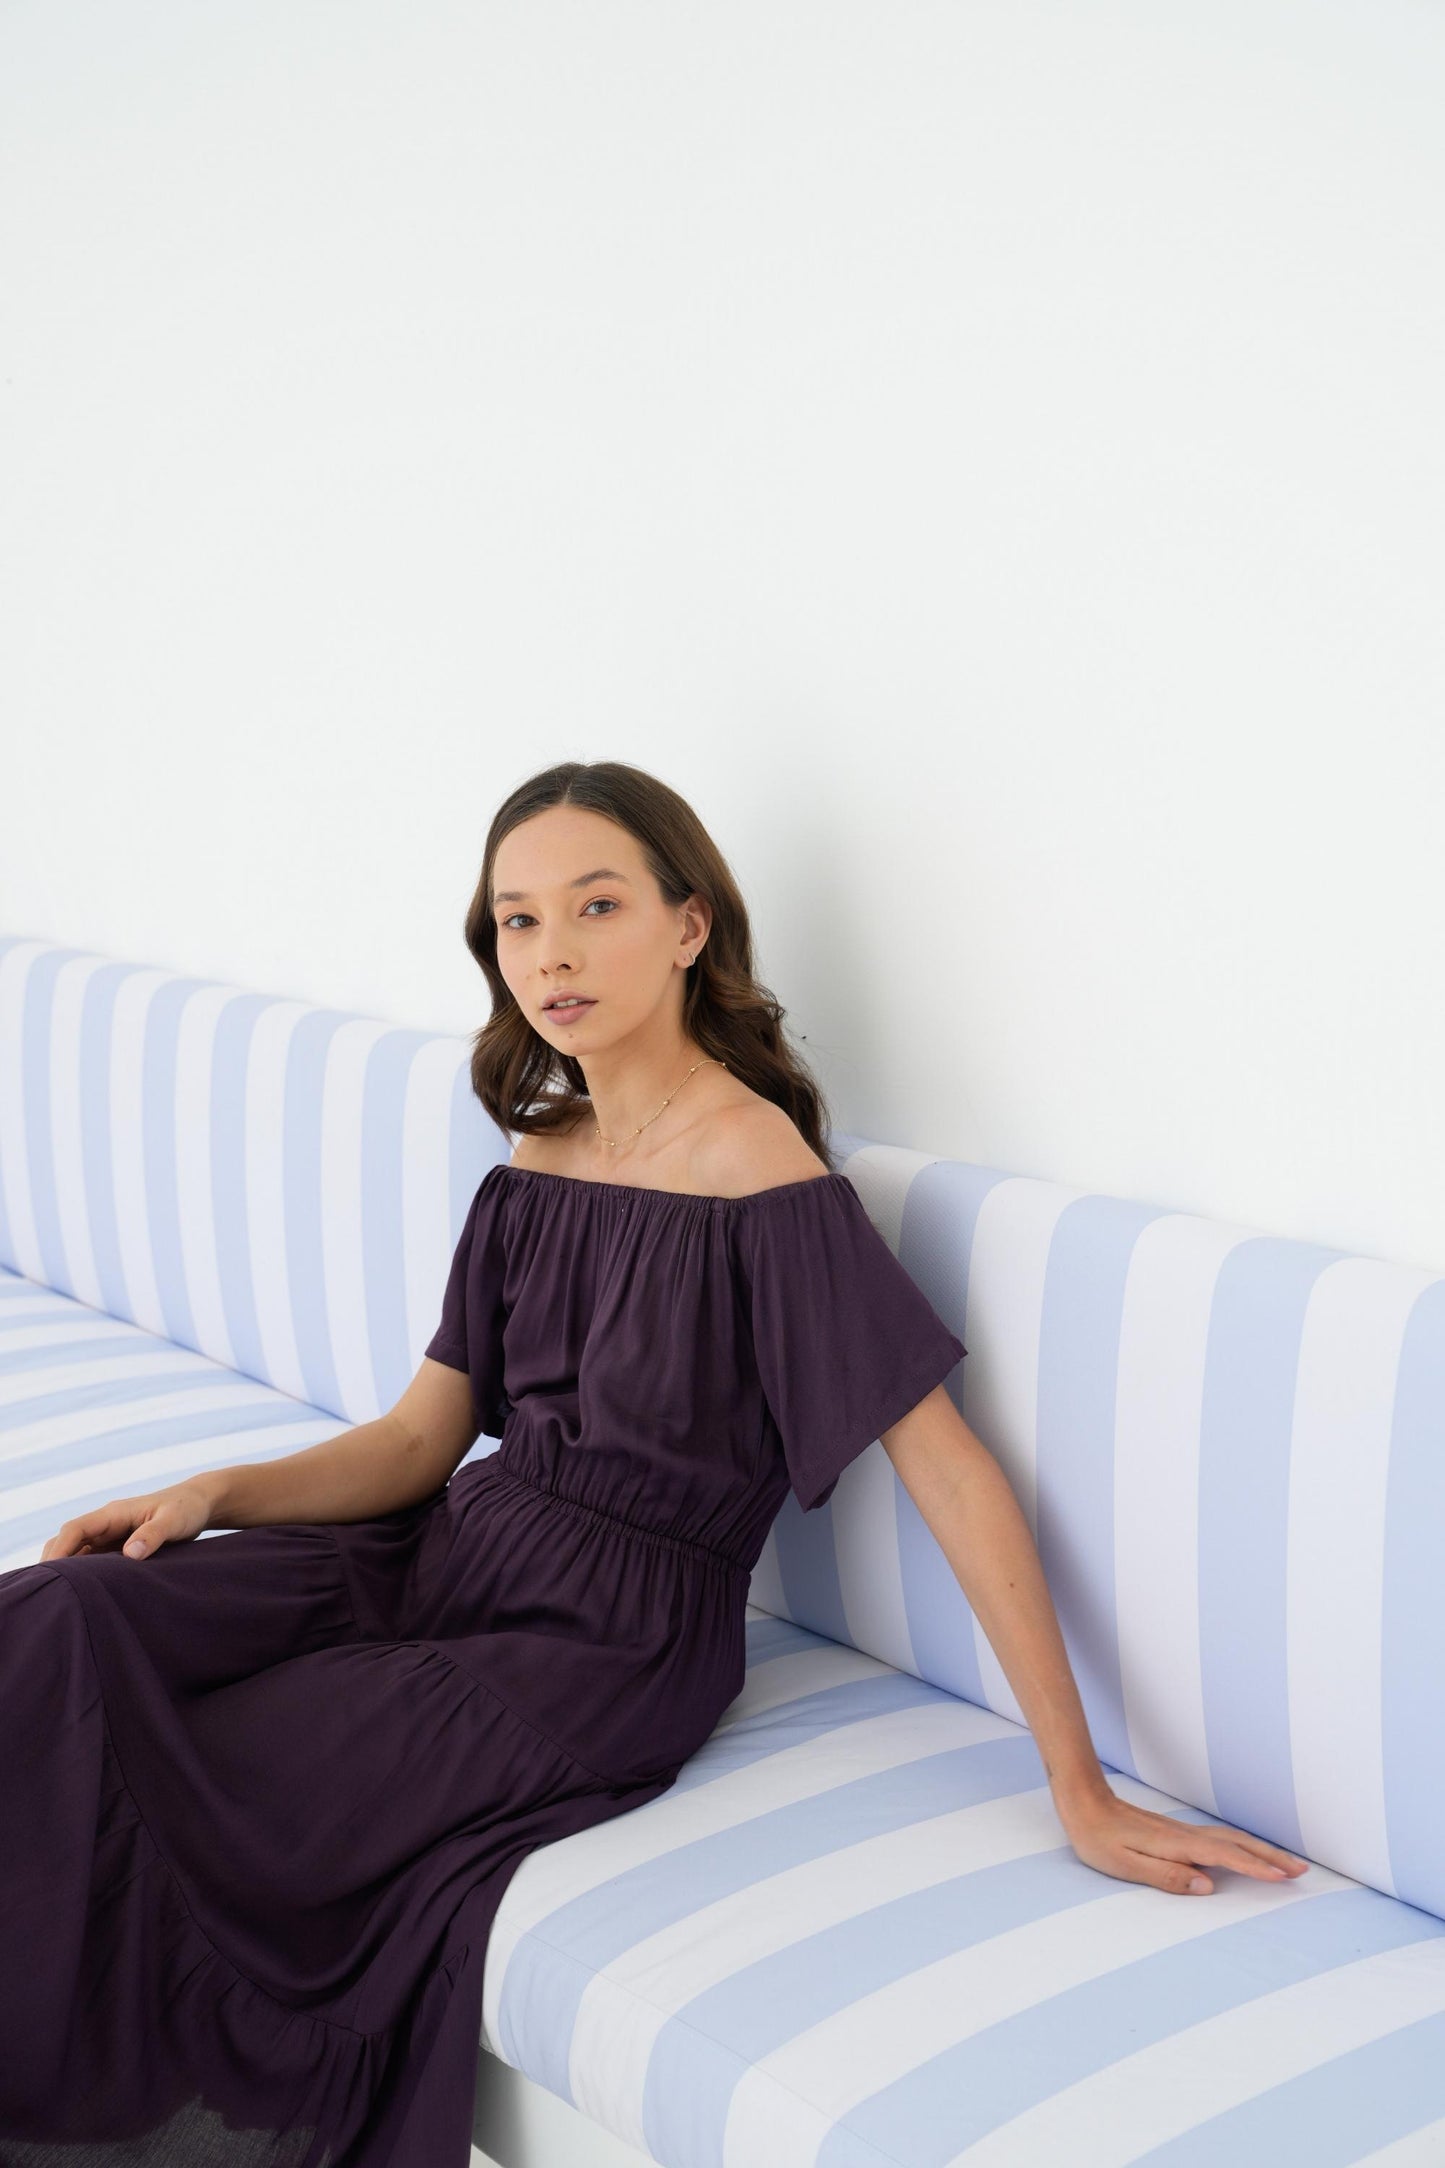 Load image into Gallery viewer, Regina Off-the-shoulder Midi Dress in Eggplant
